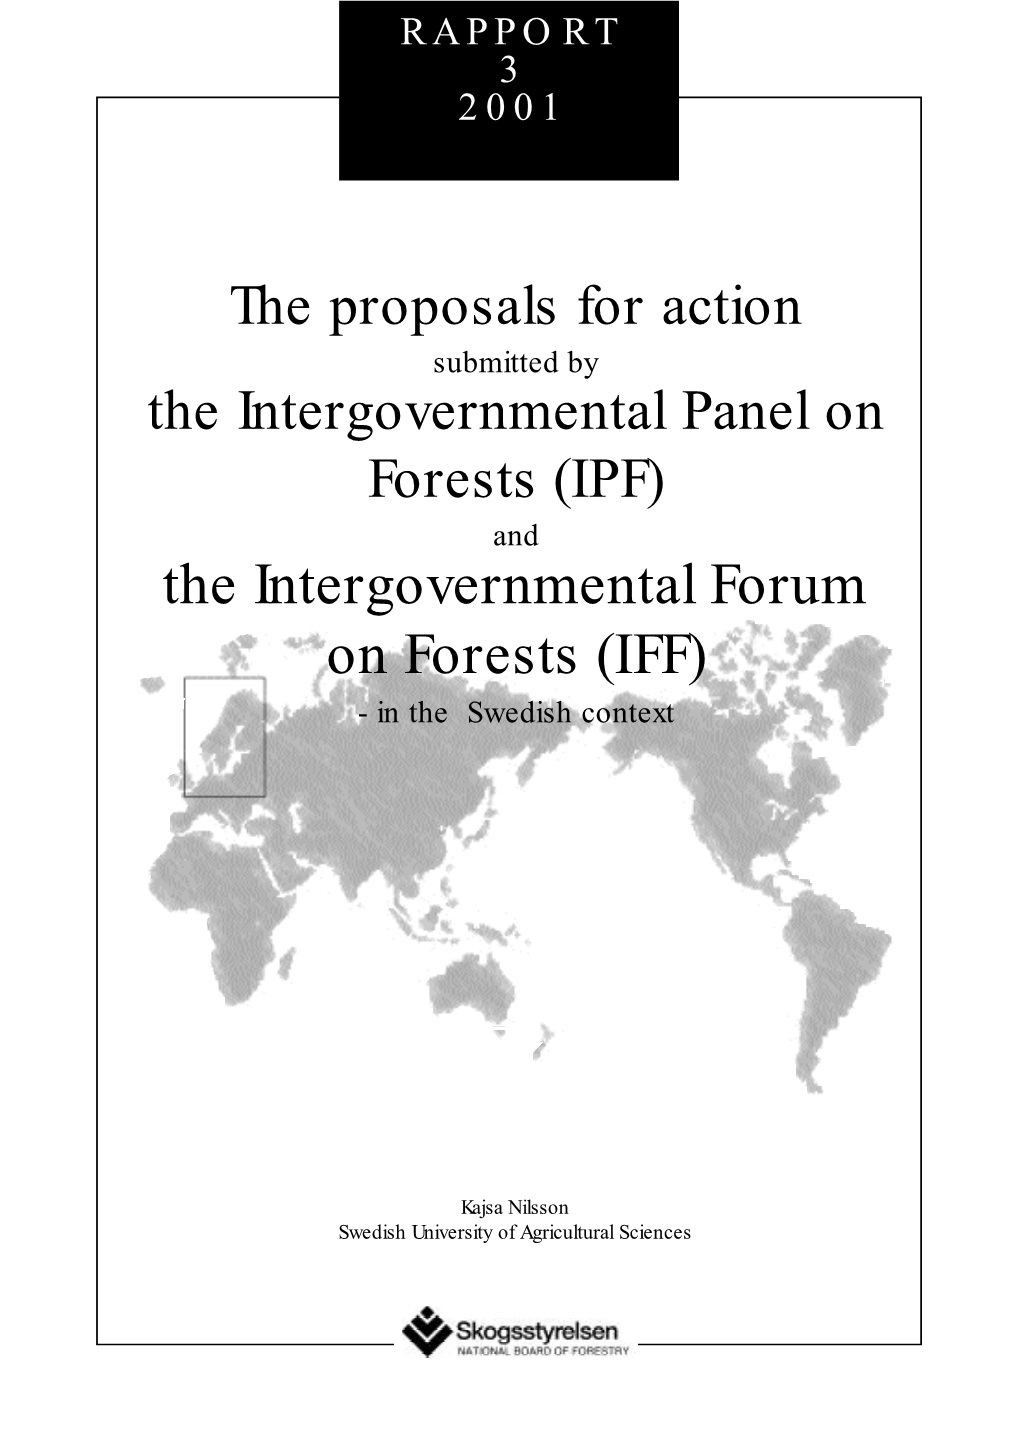 The Intergovernmental Forum on Forests (IFF) - in the Swedish Context